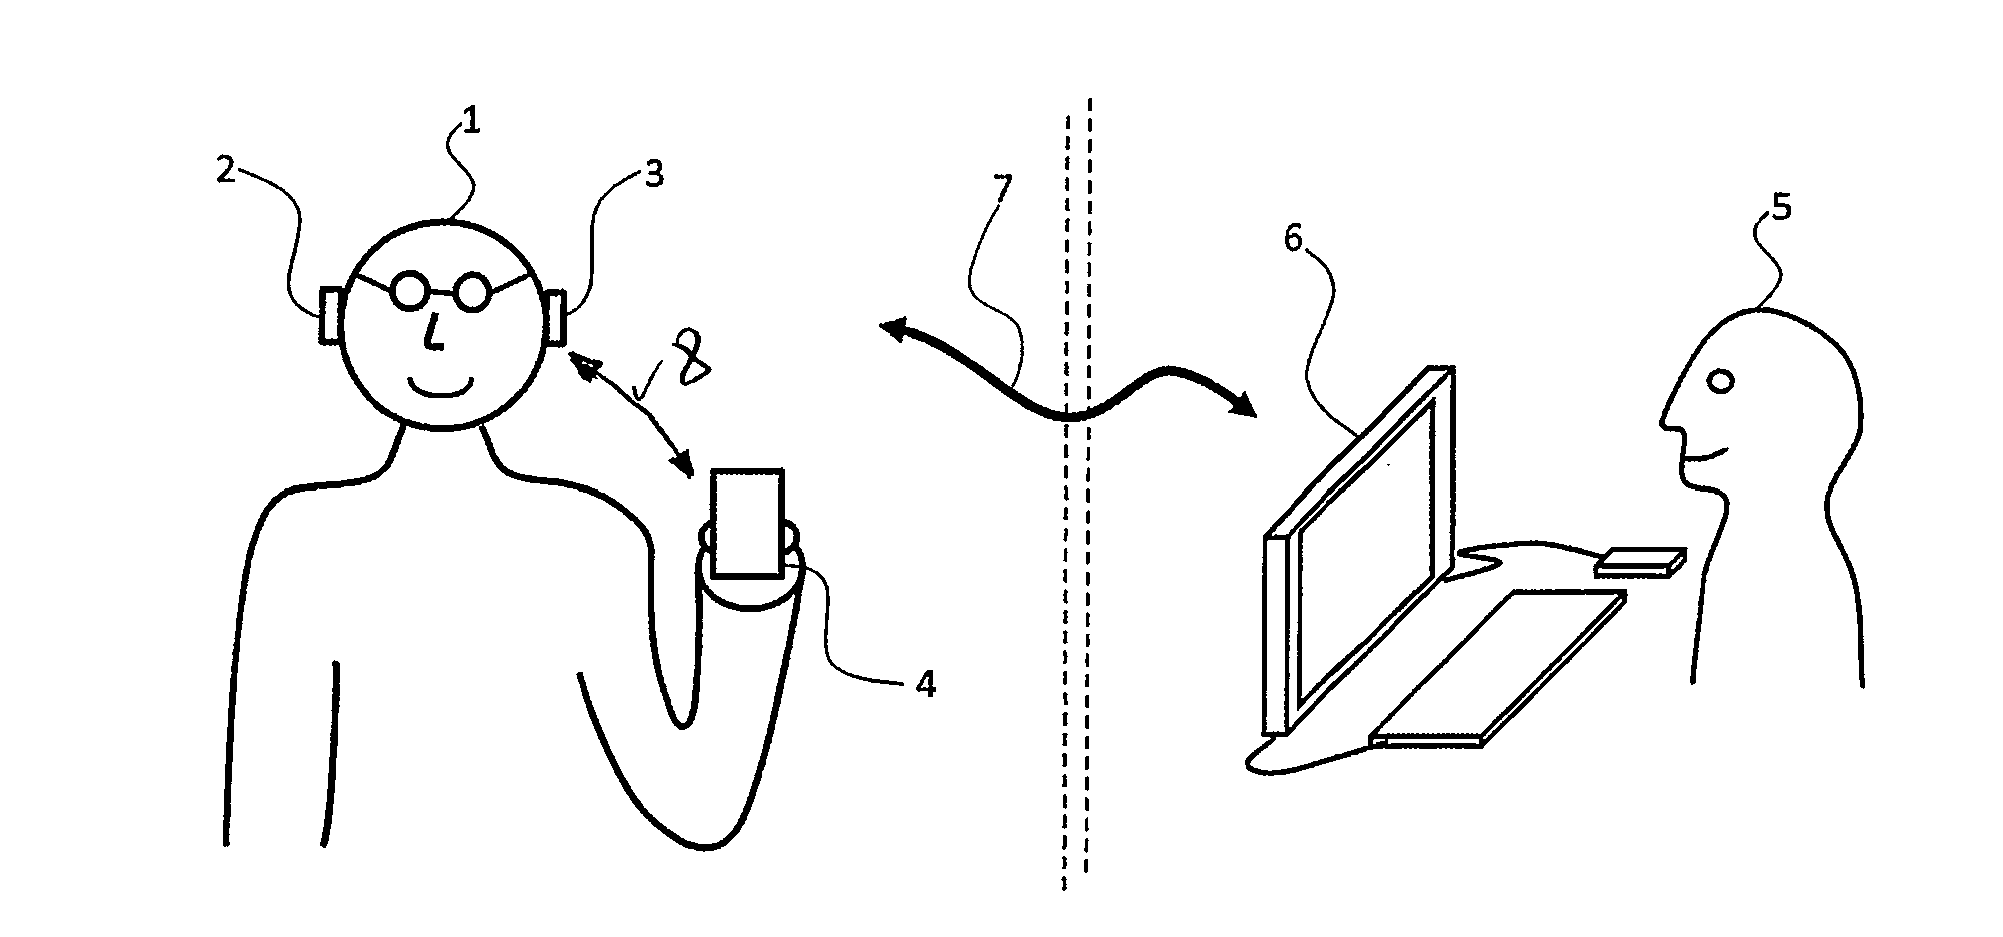 A method for fitting a hearing device as well as an arrangement for fitting the hearing device